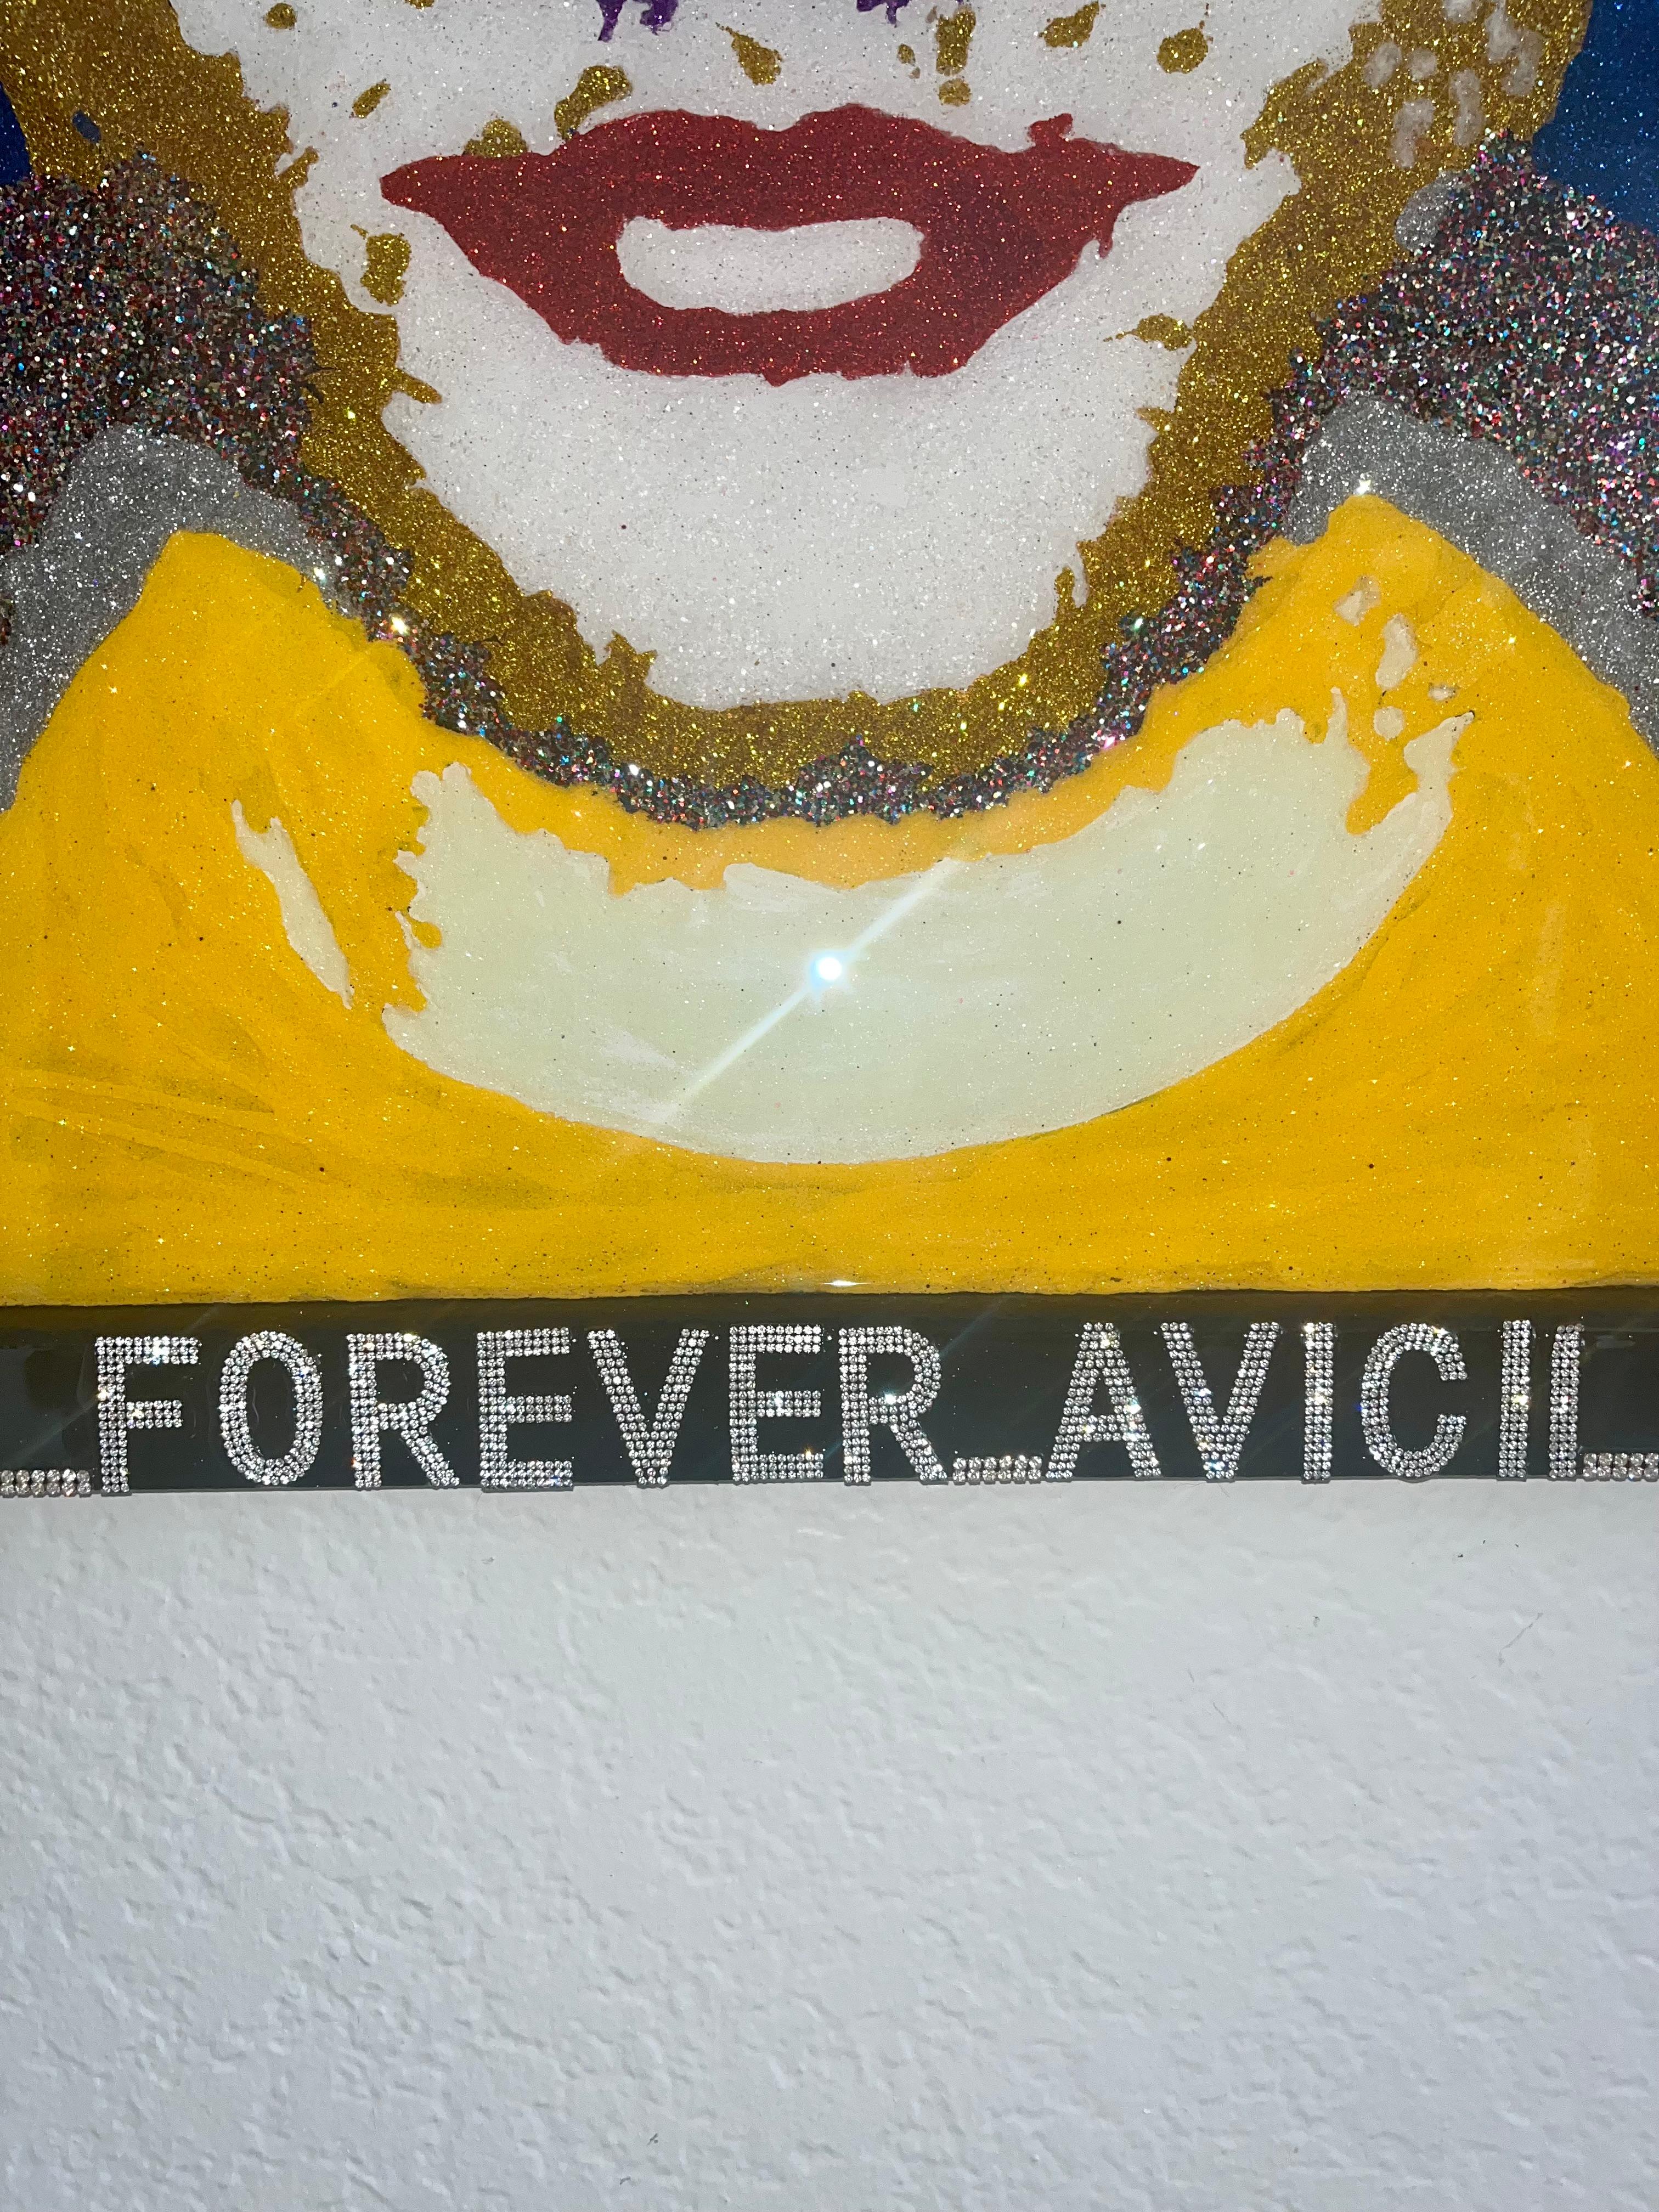 FOREVER AVICII (Original And One Of A Kind Mixed Media Art Masterpiece) For Sale 7